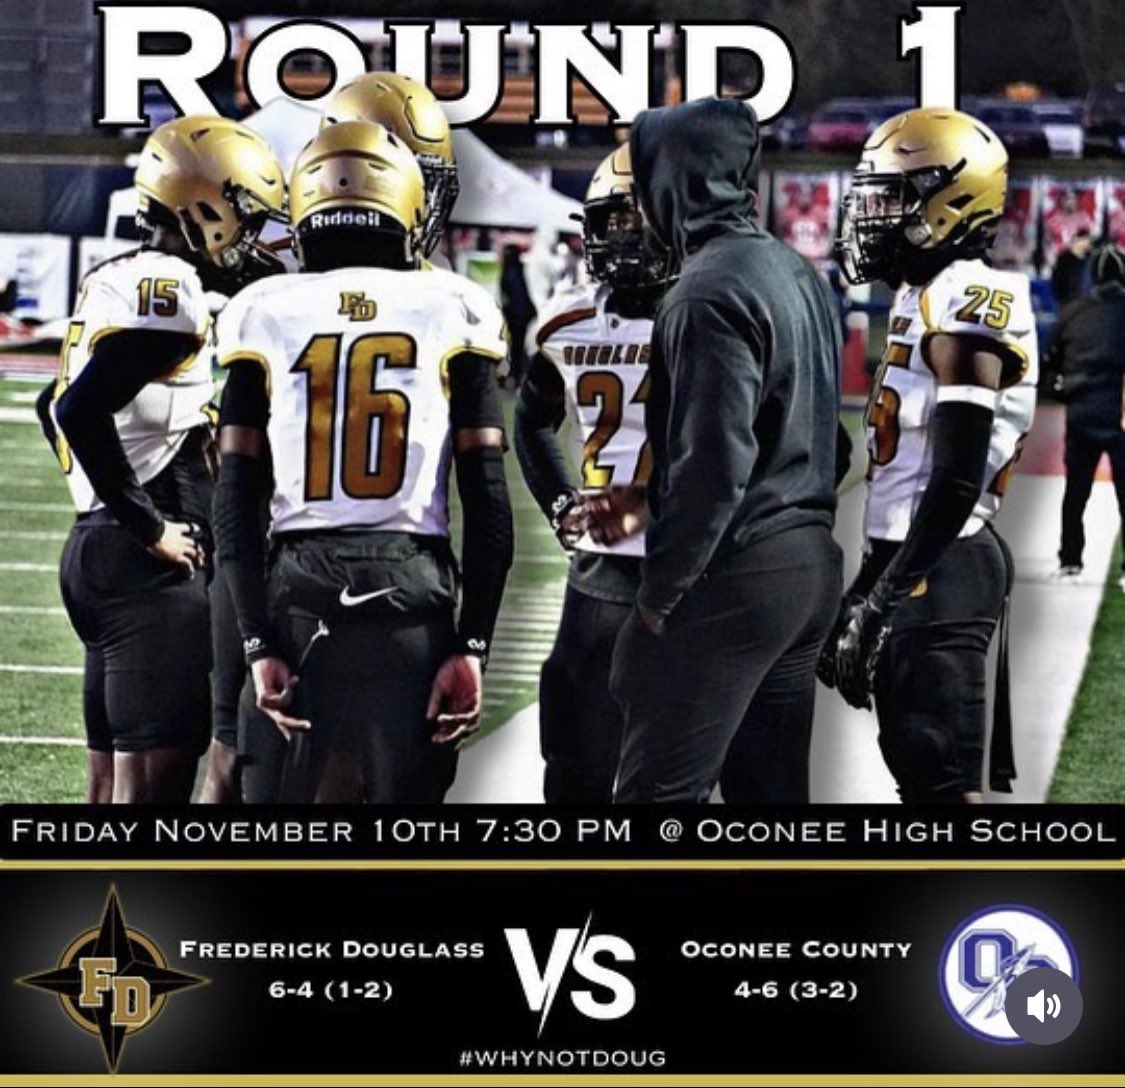 Round 1 of the playoffs begin this Friday, November 10th! Please support our team as they travel to Oconee County High School. Let’s go Astros! #webelieve #Astropride💛🖤